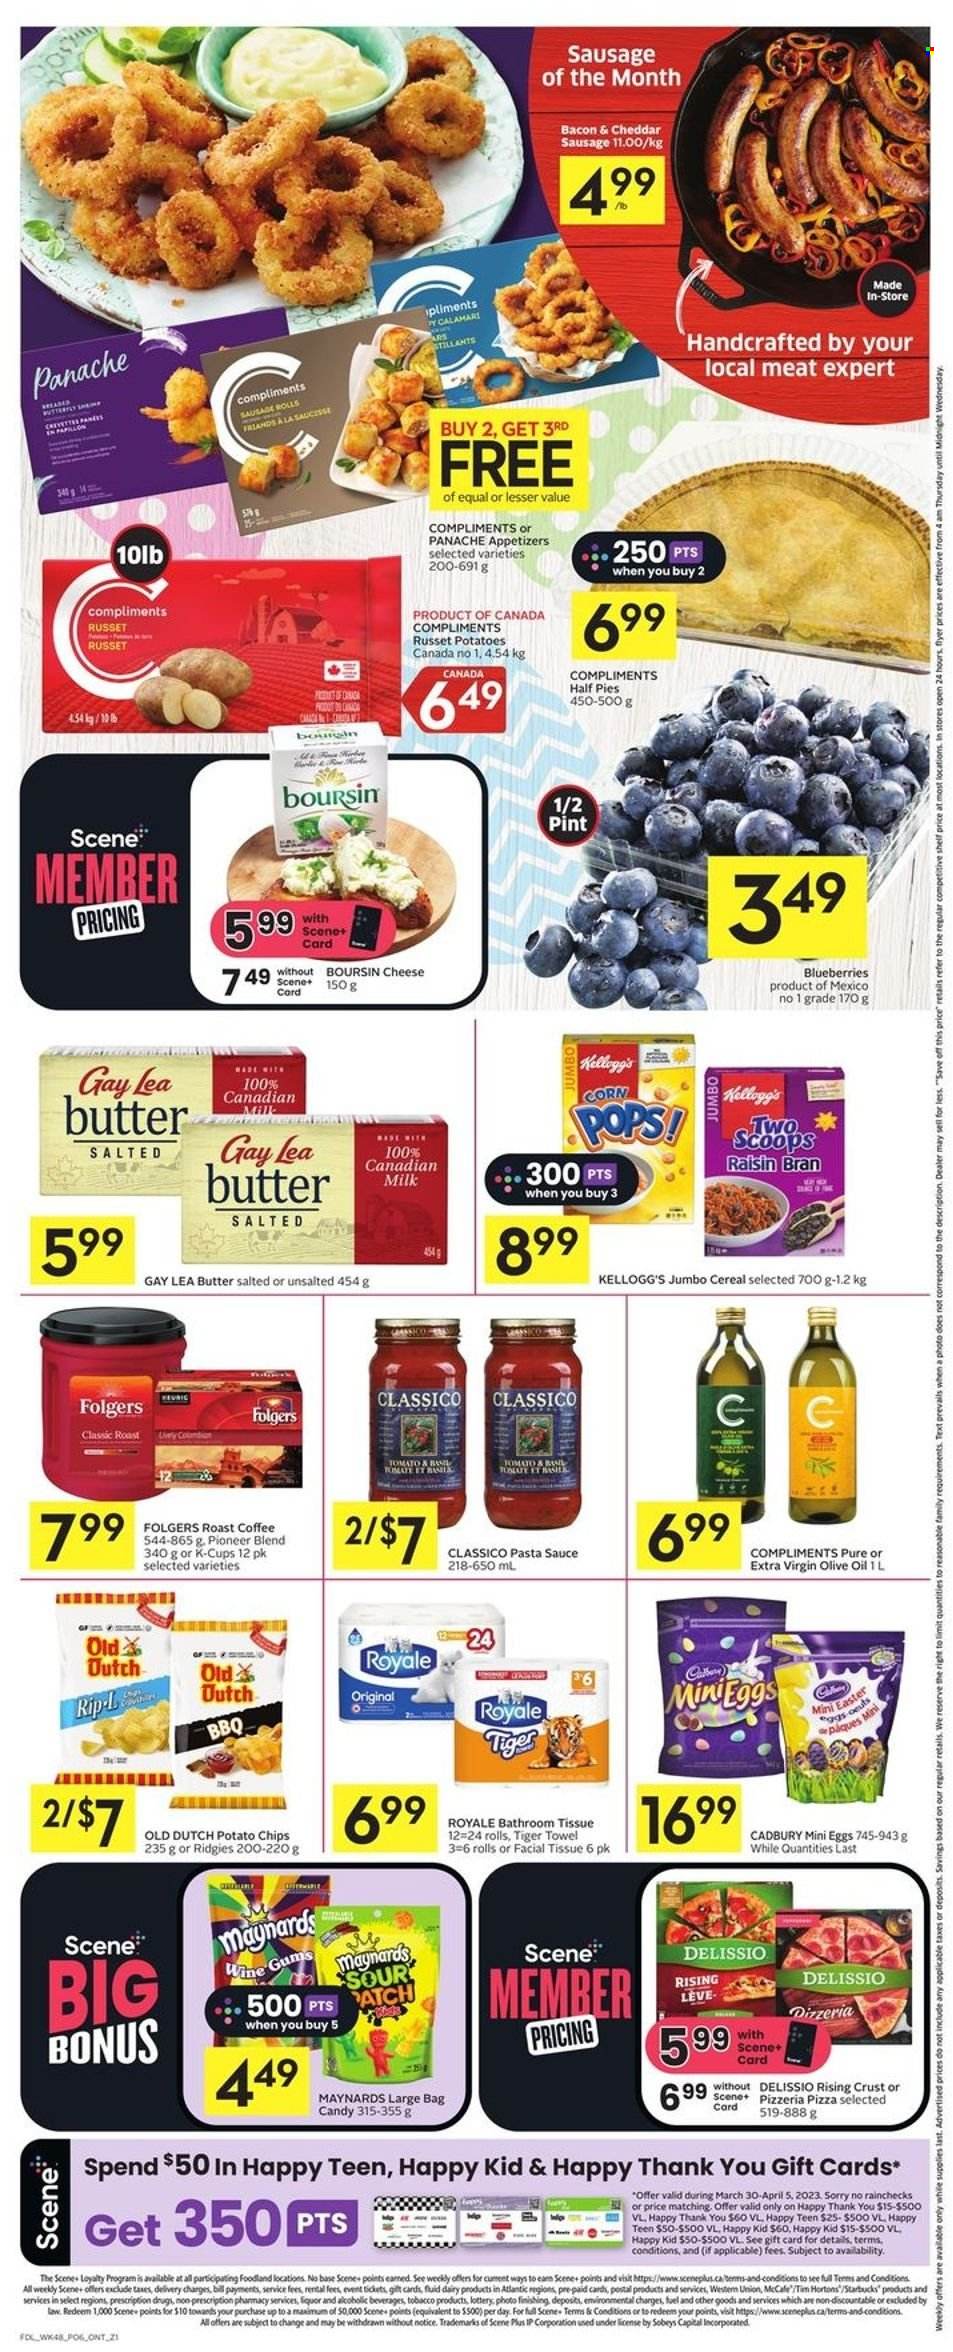 thumbnail - Foodland Flyer - March 30, 2023 - April 05, 2023 - Sales products - sausage rolls, russet potatoes, blueberries, calamari, pizza, pasta sauce, sauce, roast, bacon, sausage, milk, butter, easter egg, Kellogg's, Cadbury, chocolate egg, sour patch, Candy, potato chips, chips, cereals, Corn Pops, Raisin Bran, Classico, extra virgin olive oil, olive oil, oil, coffee, Folgers, coffee capsules, Starbucks, McCafe, K-Cups, liquor, bath tissue. Page 2.